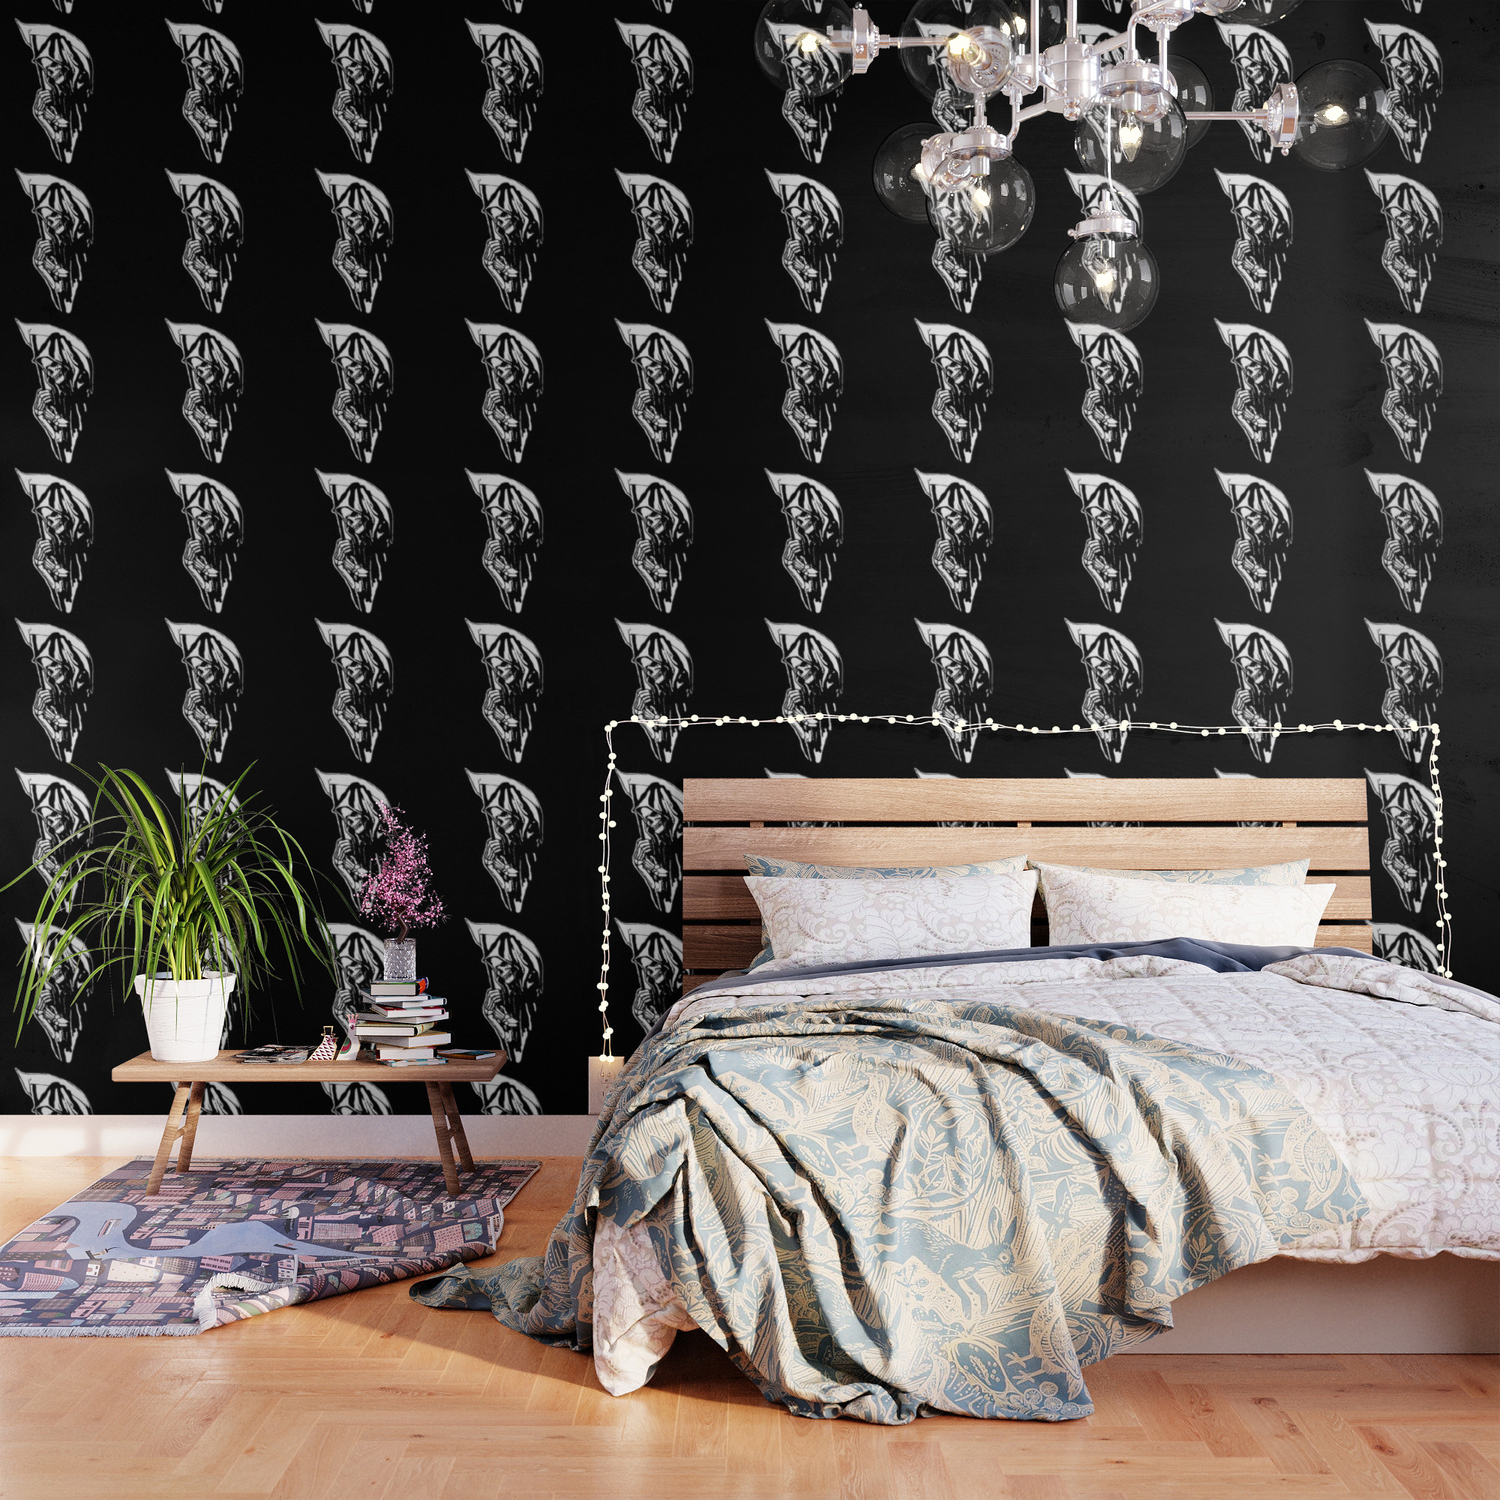 MAKE THIS OCTOBER AND HALLOWEEN A SCREAM WITH THE GRIM REAPER Wallpaper by  MONOFACES | Society6